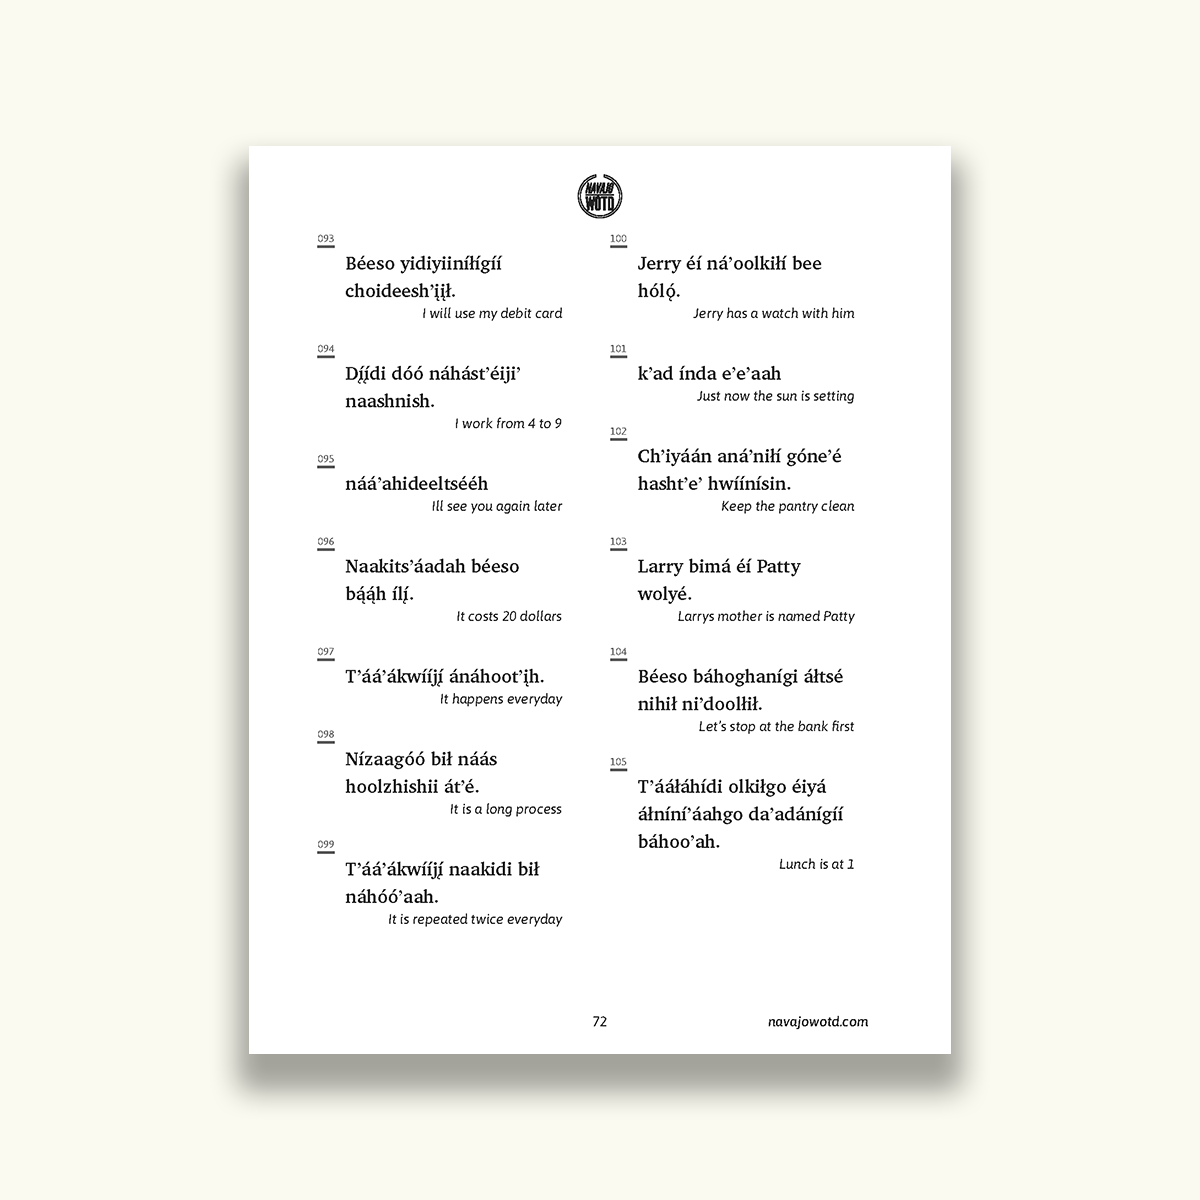 Preview of the PDF e-book showing phrases in Navajo